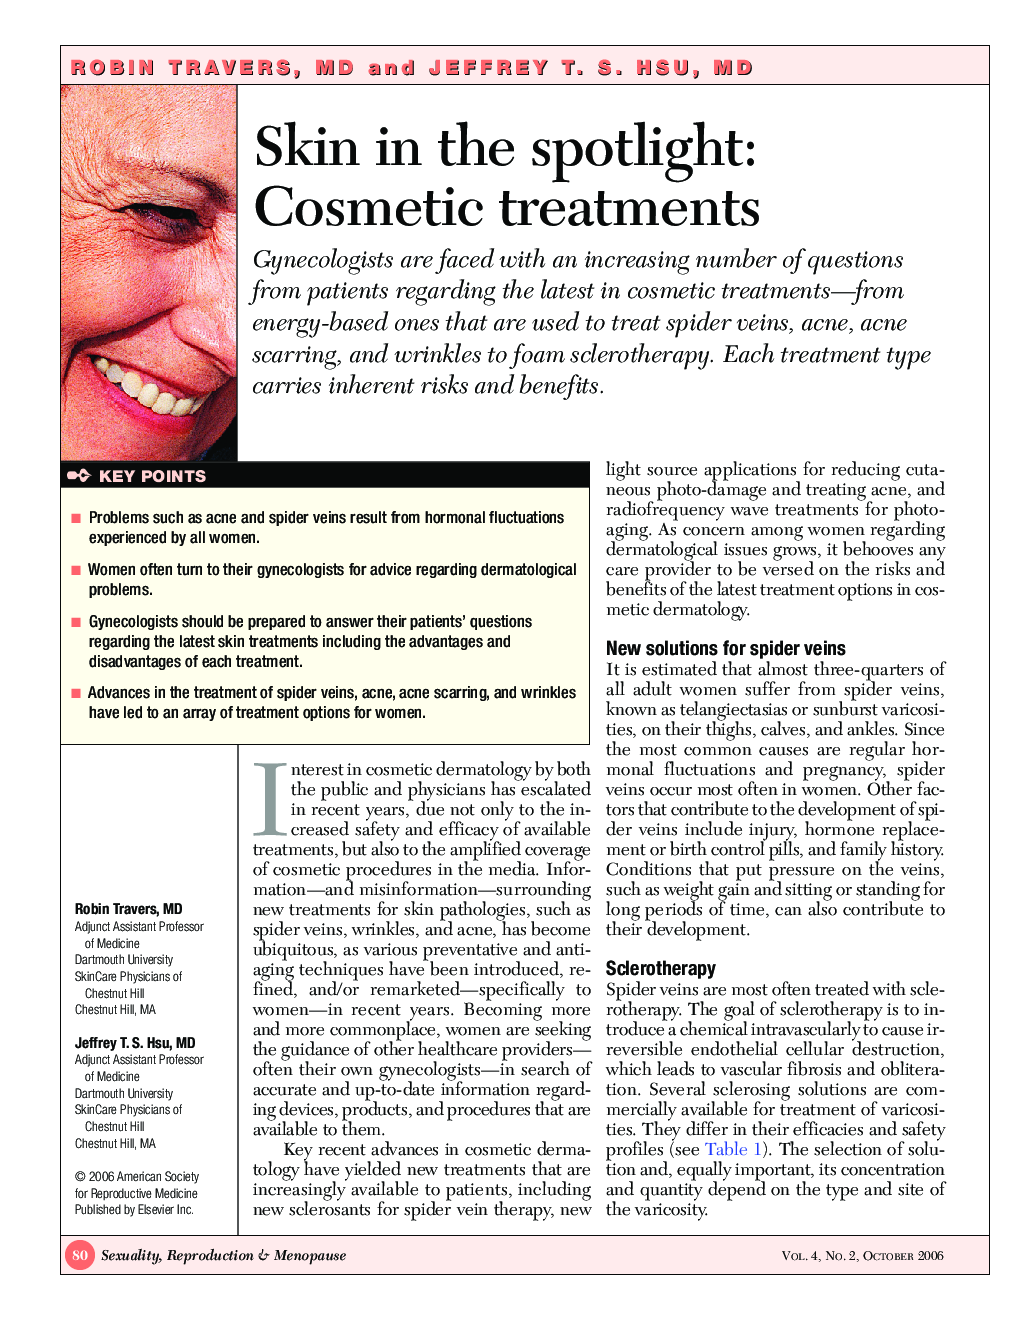 Skin in the spotlight: Cosmetic treatments